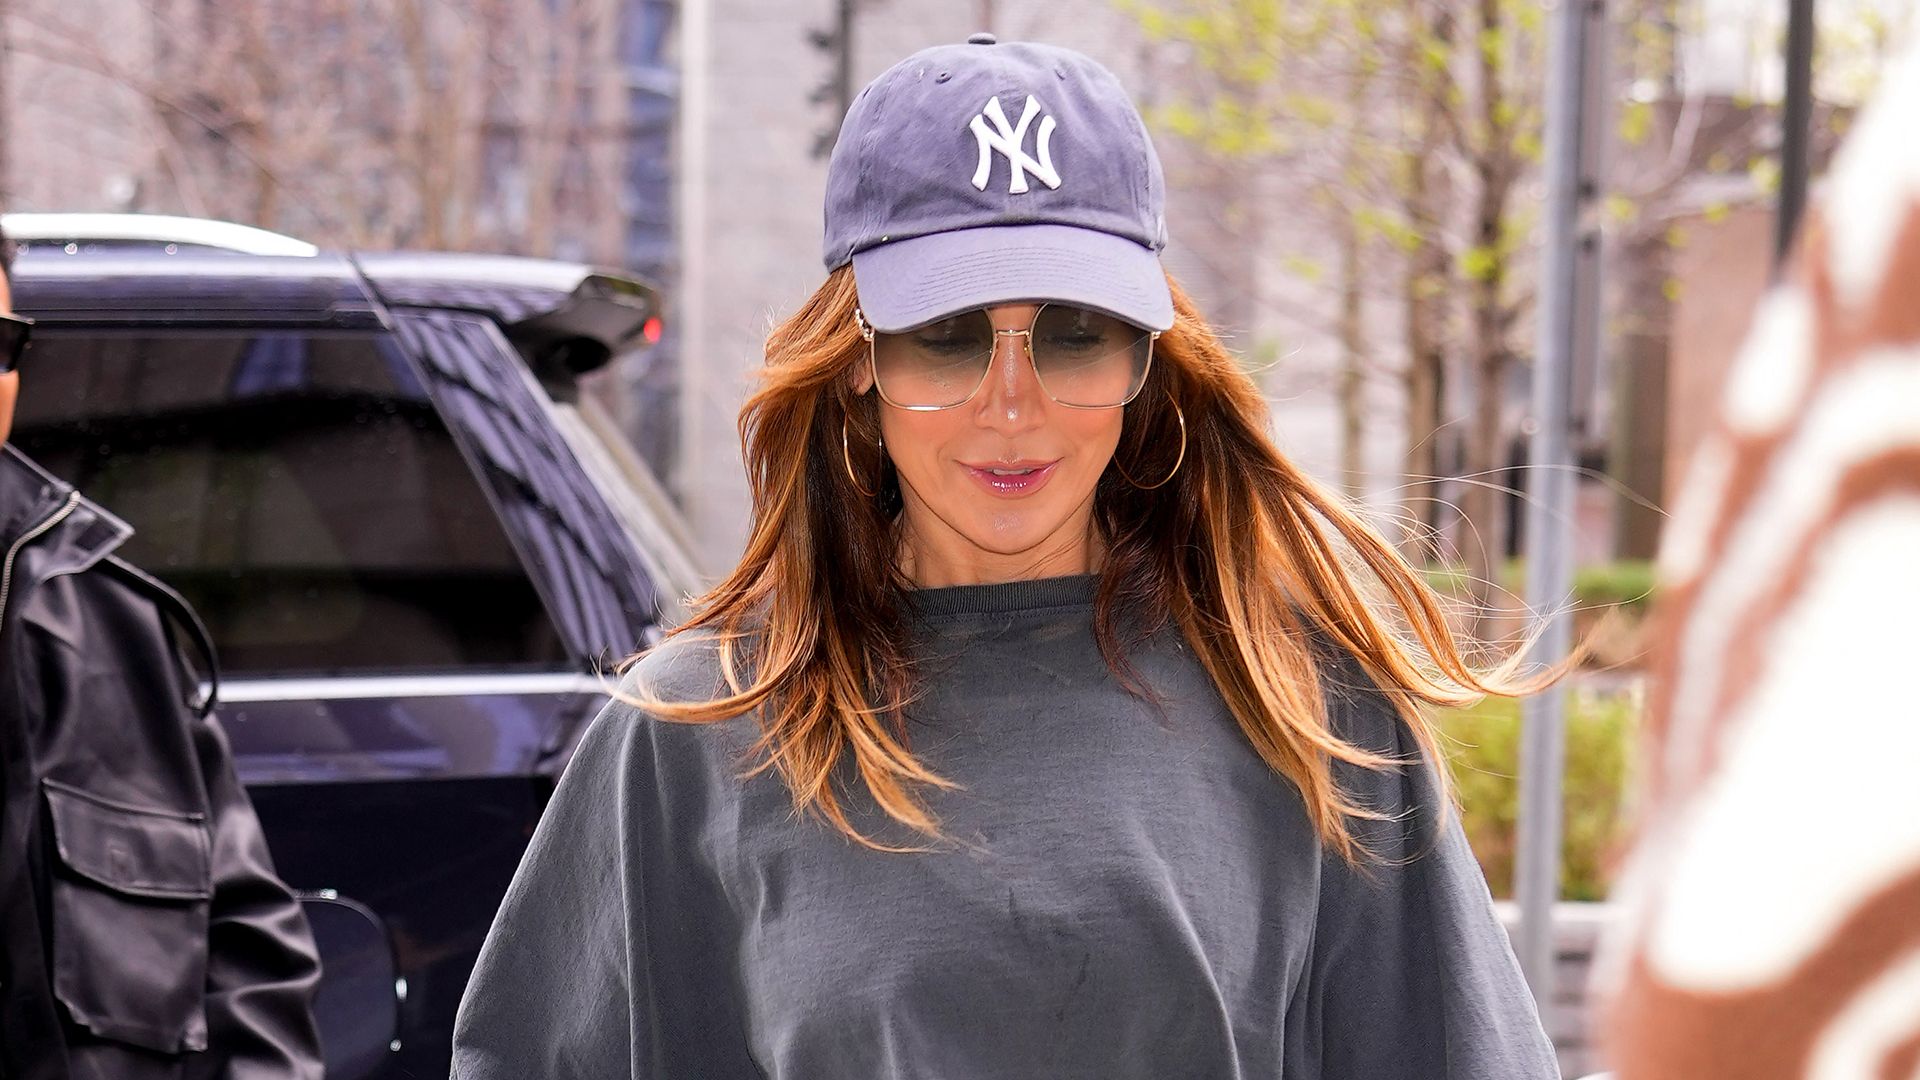 Jennifer Lopez wearing a baseball cap and crop top in New York.